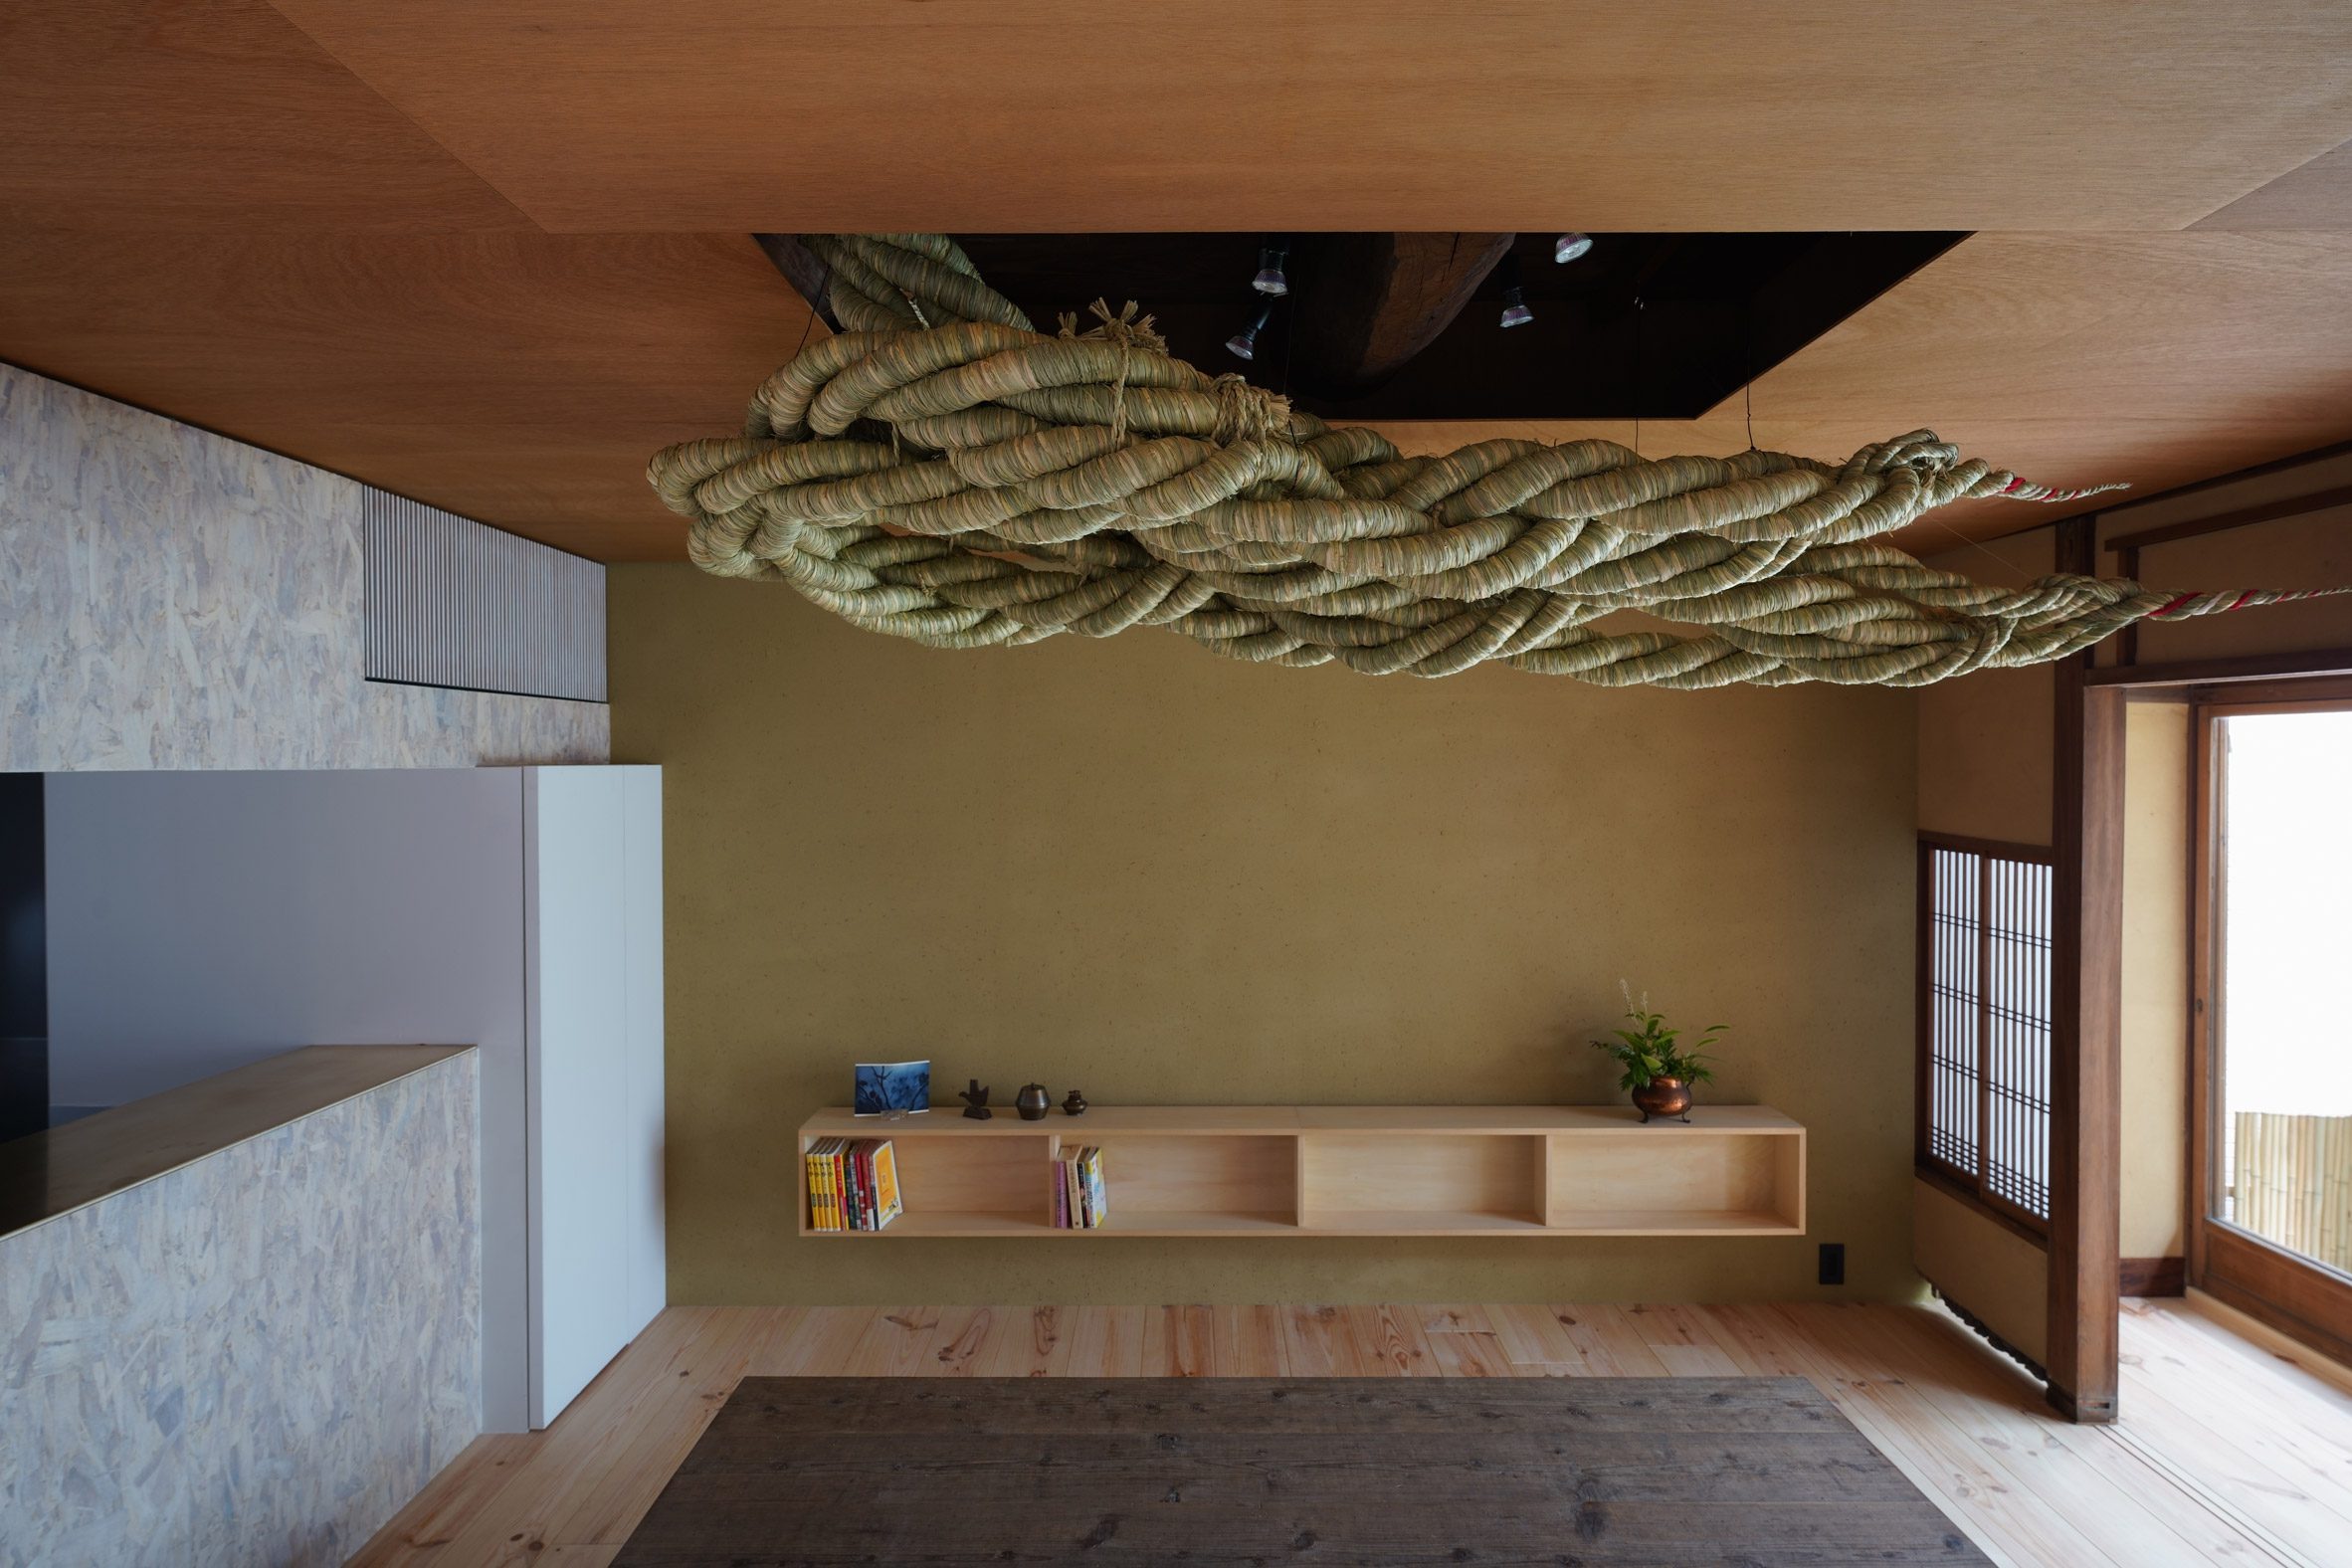 Dining area of Kyoto soba restaurant by Td-Atelier and Endo Shorijo Design